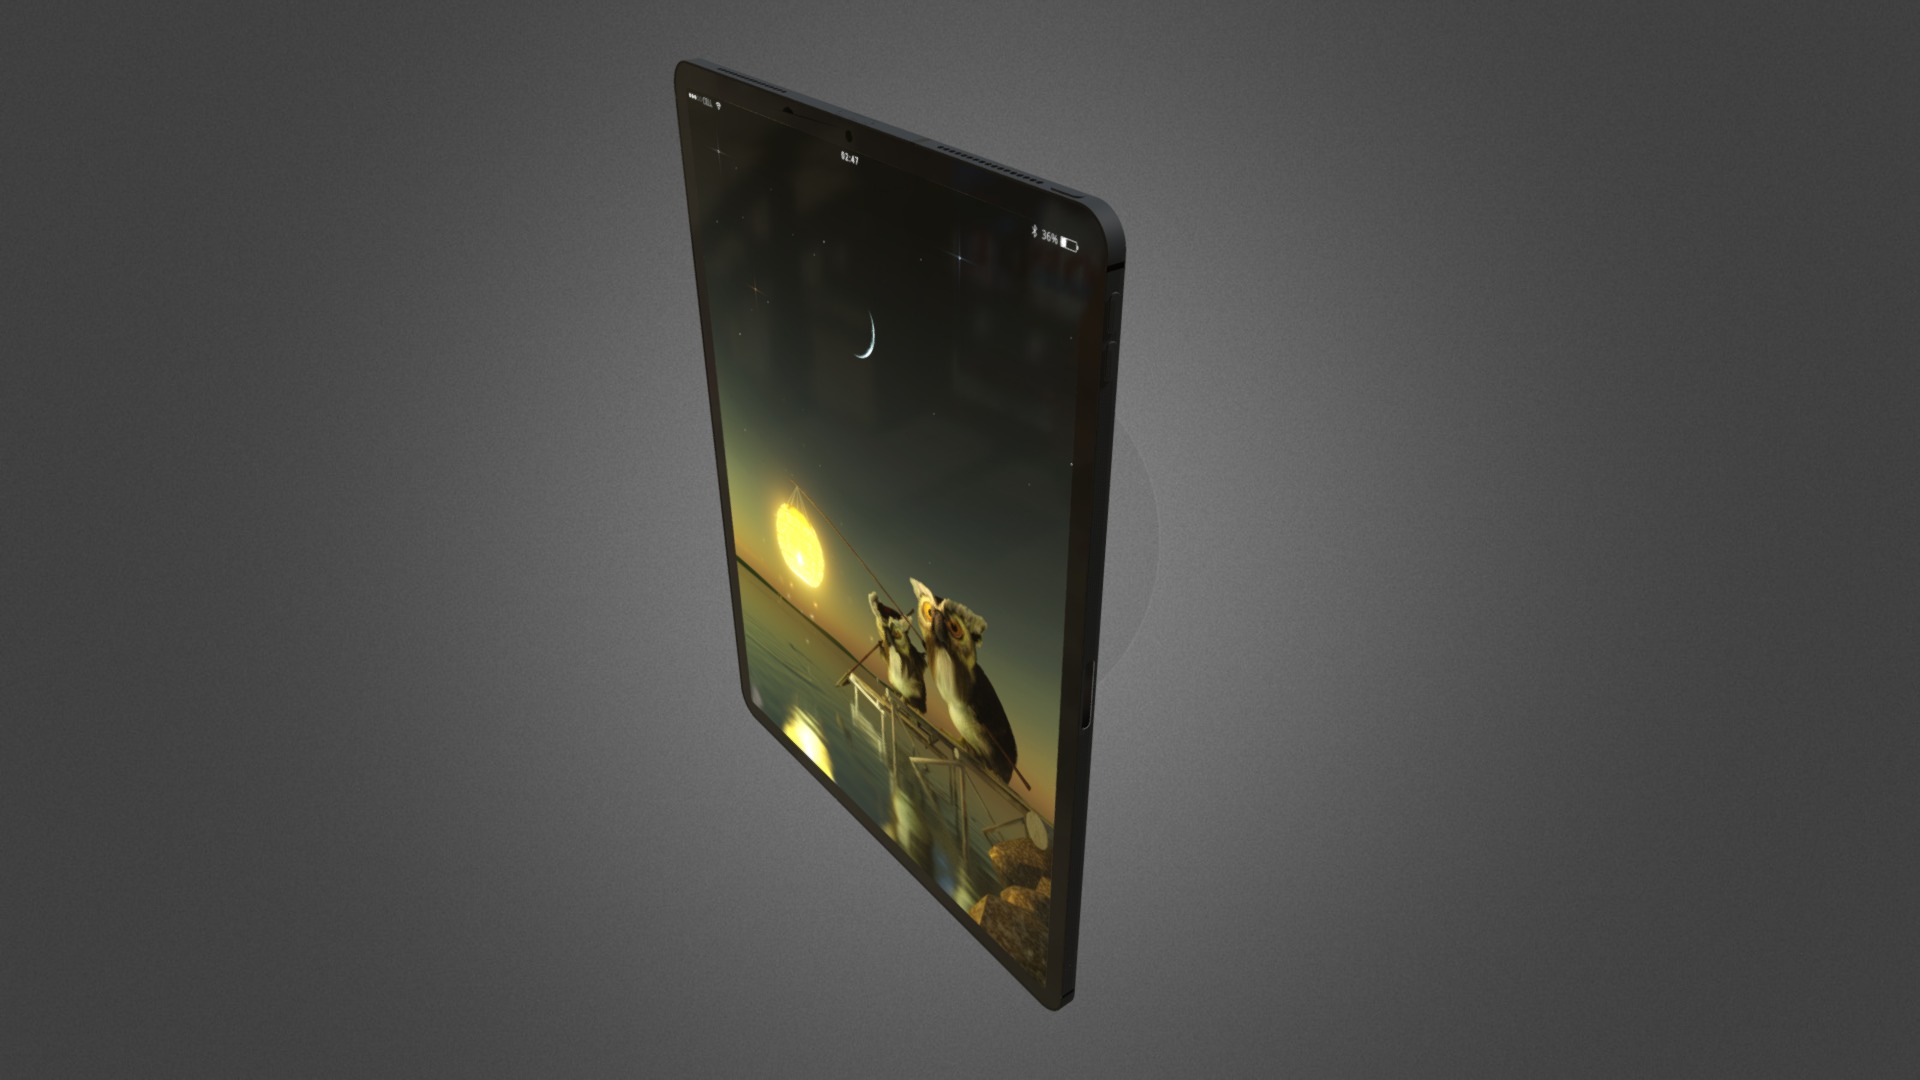 3D model iPad Pro 2018 - This is a 3D model of the iPad Pro 2018. The 3D model is about a cell phone with a reflection of a group of people on it.